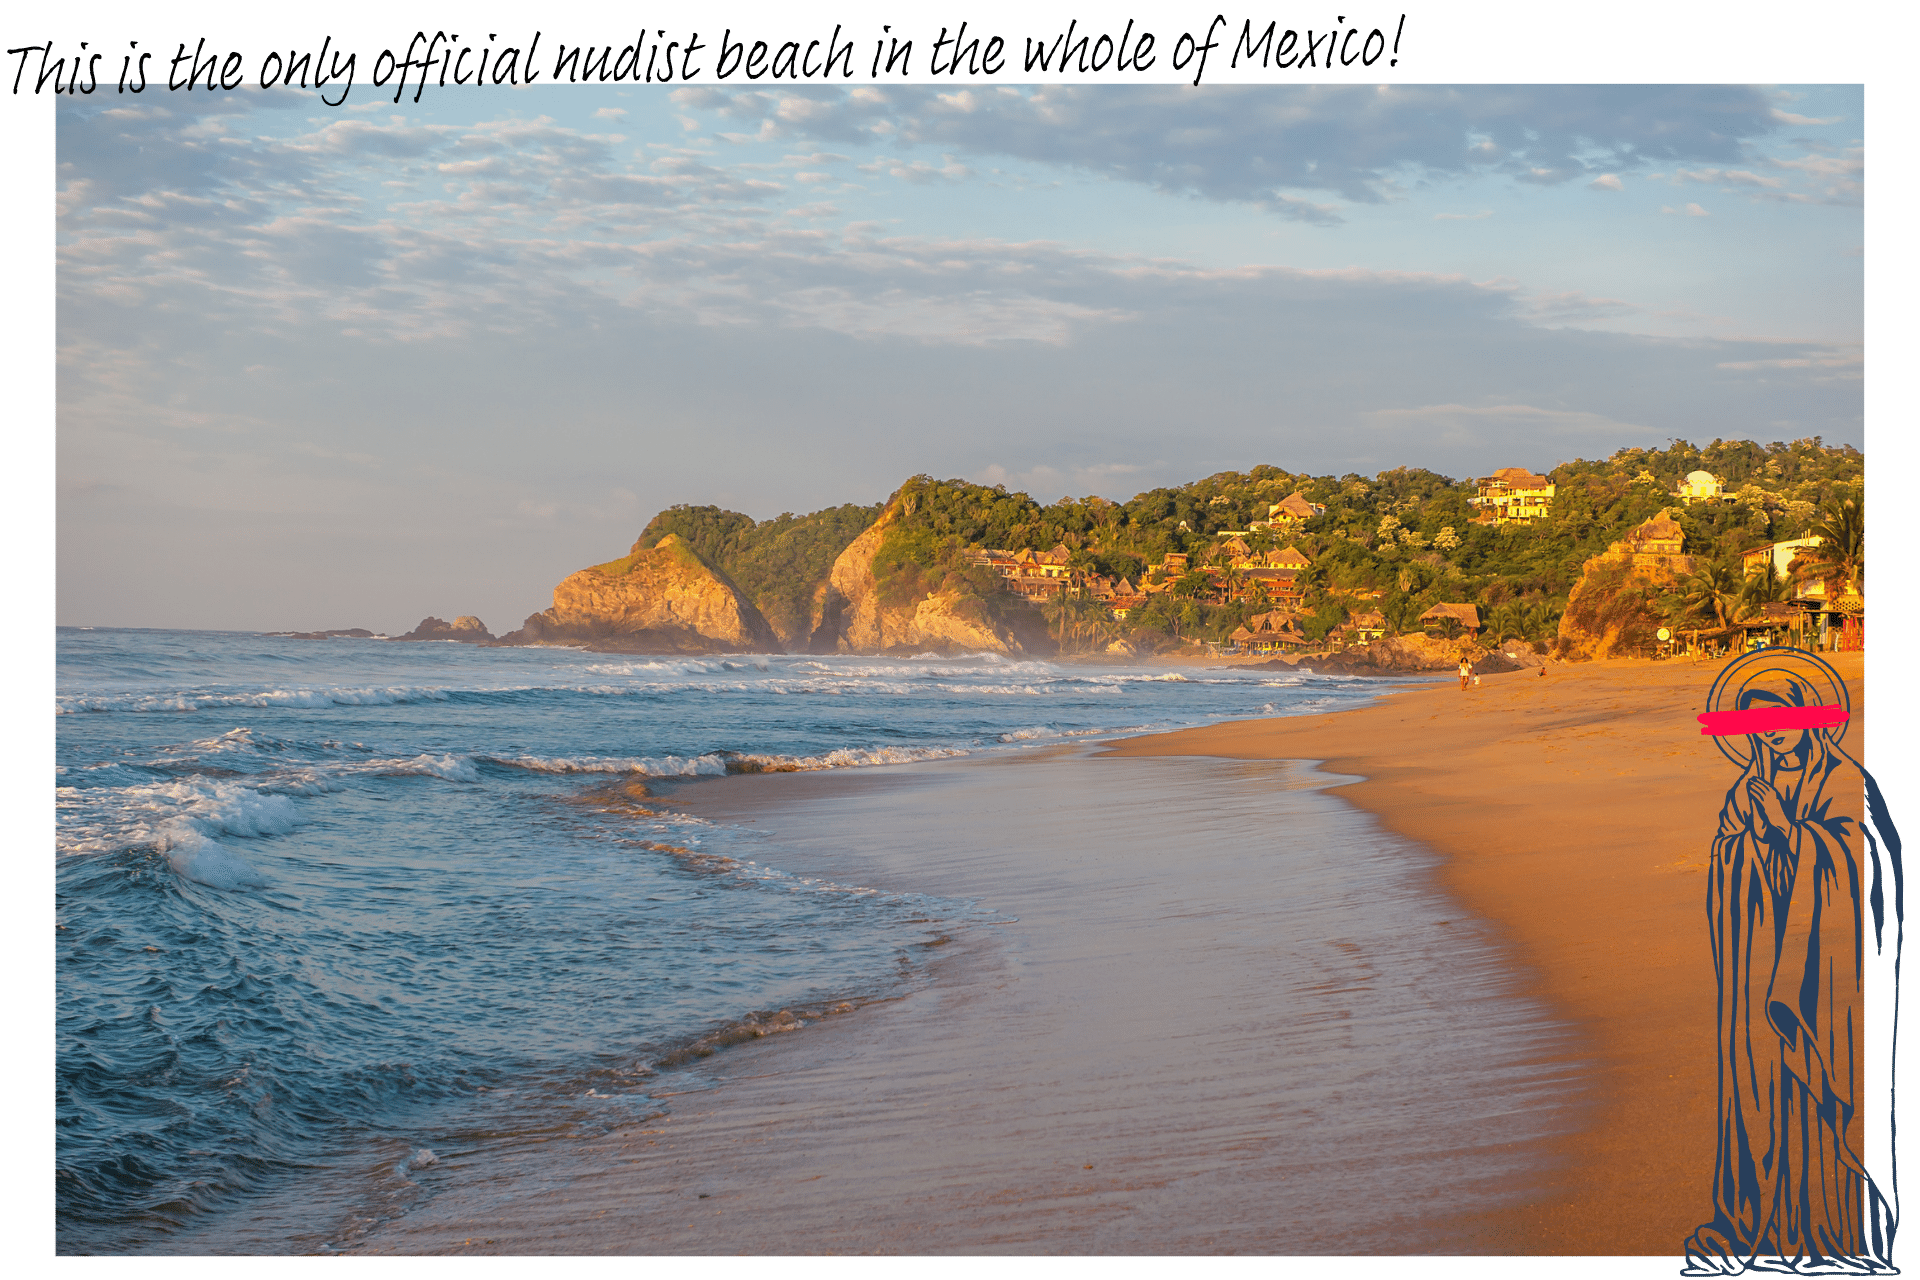 Playa Zipolite is Mexico's only official nudist beach, and is one of the world's best nudist beaches.